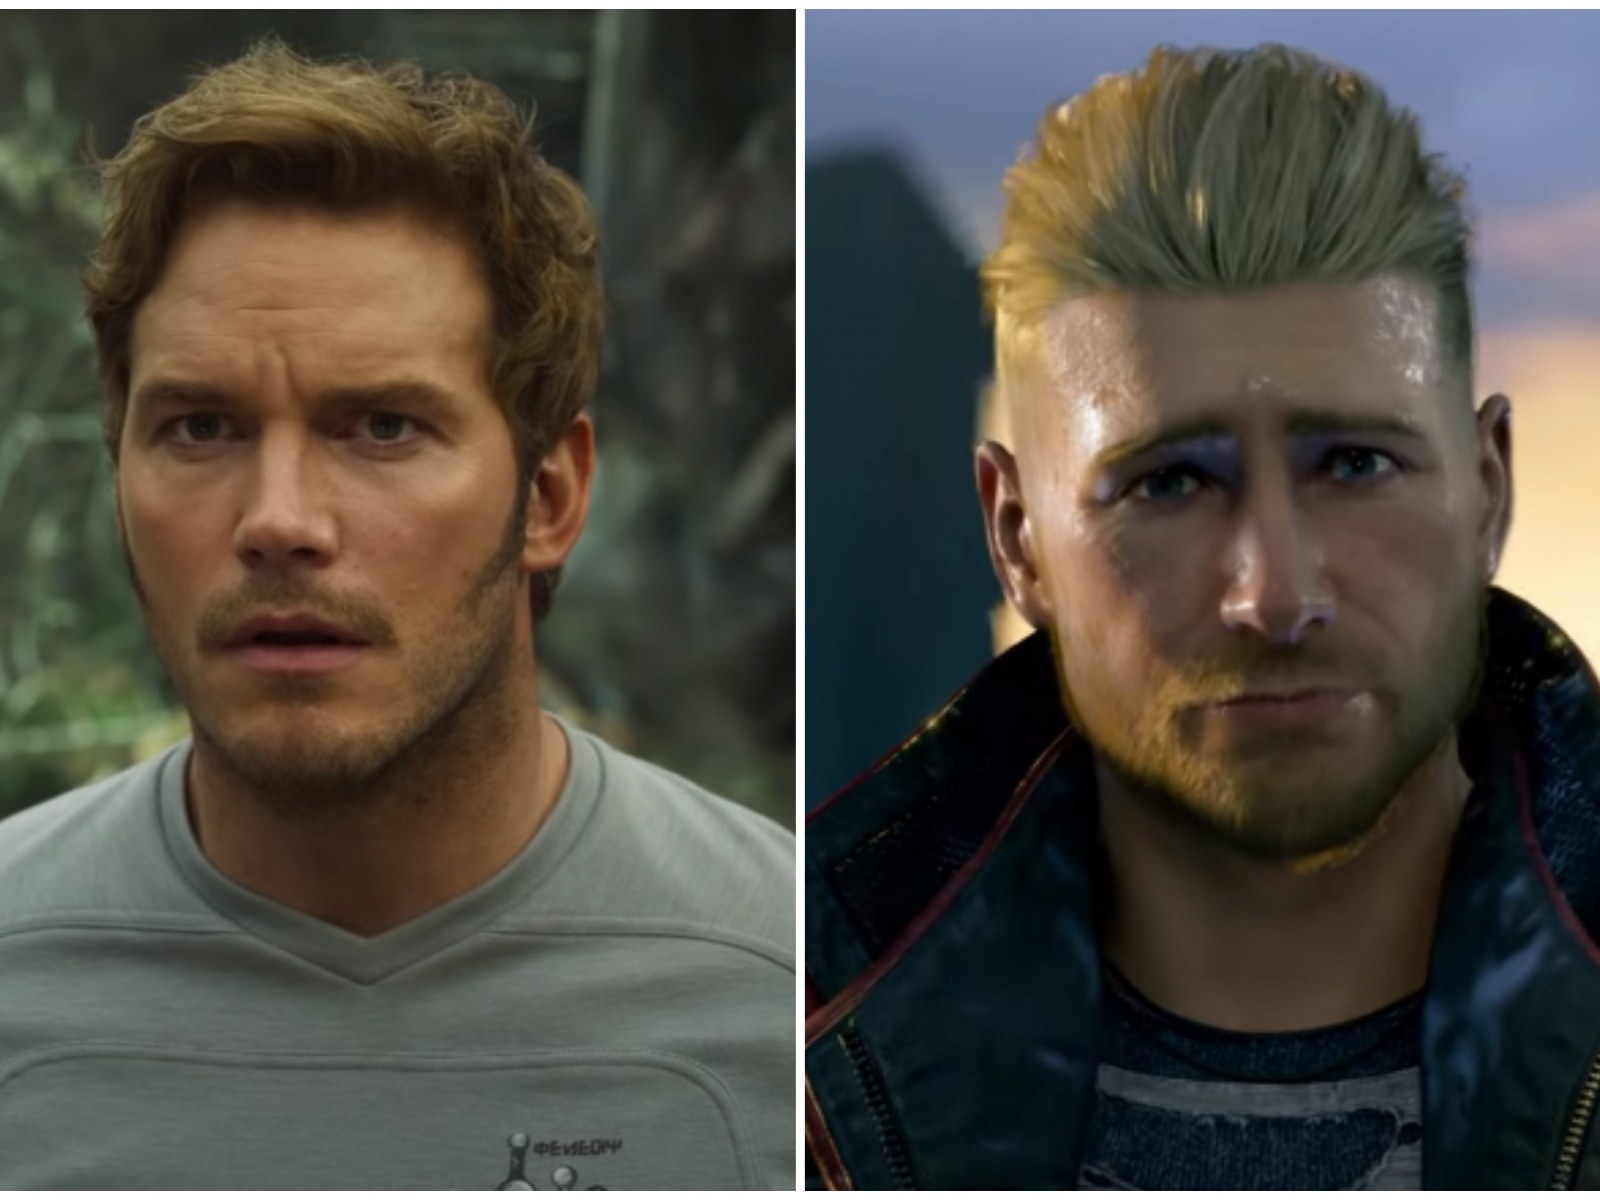 Chris Pratt Memes Erupt Over 'Guardians of the Galaxy' Game's Star Lord